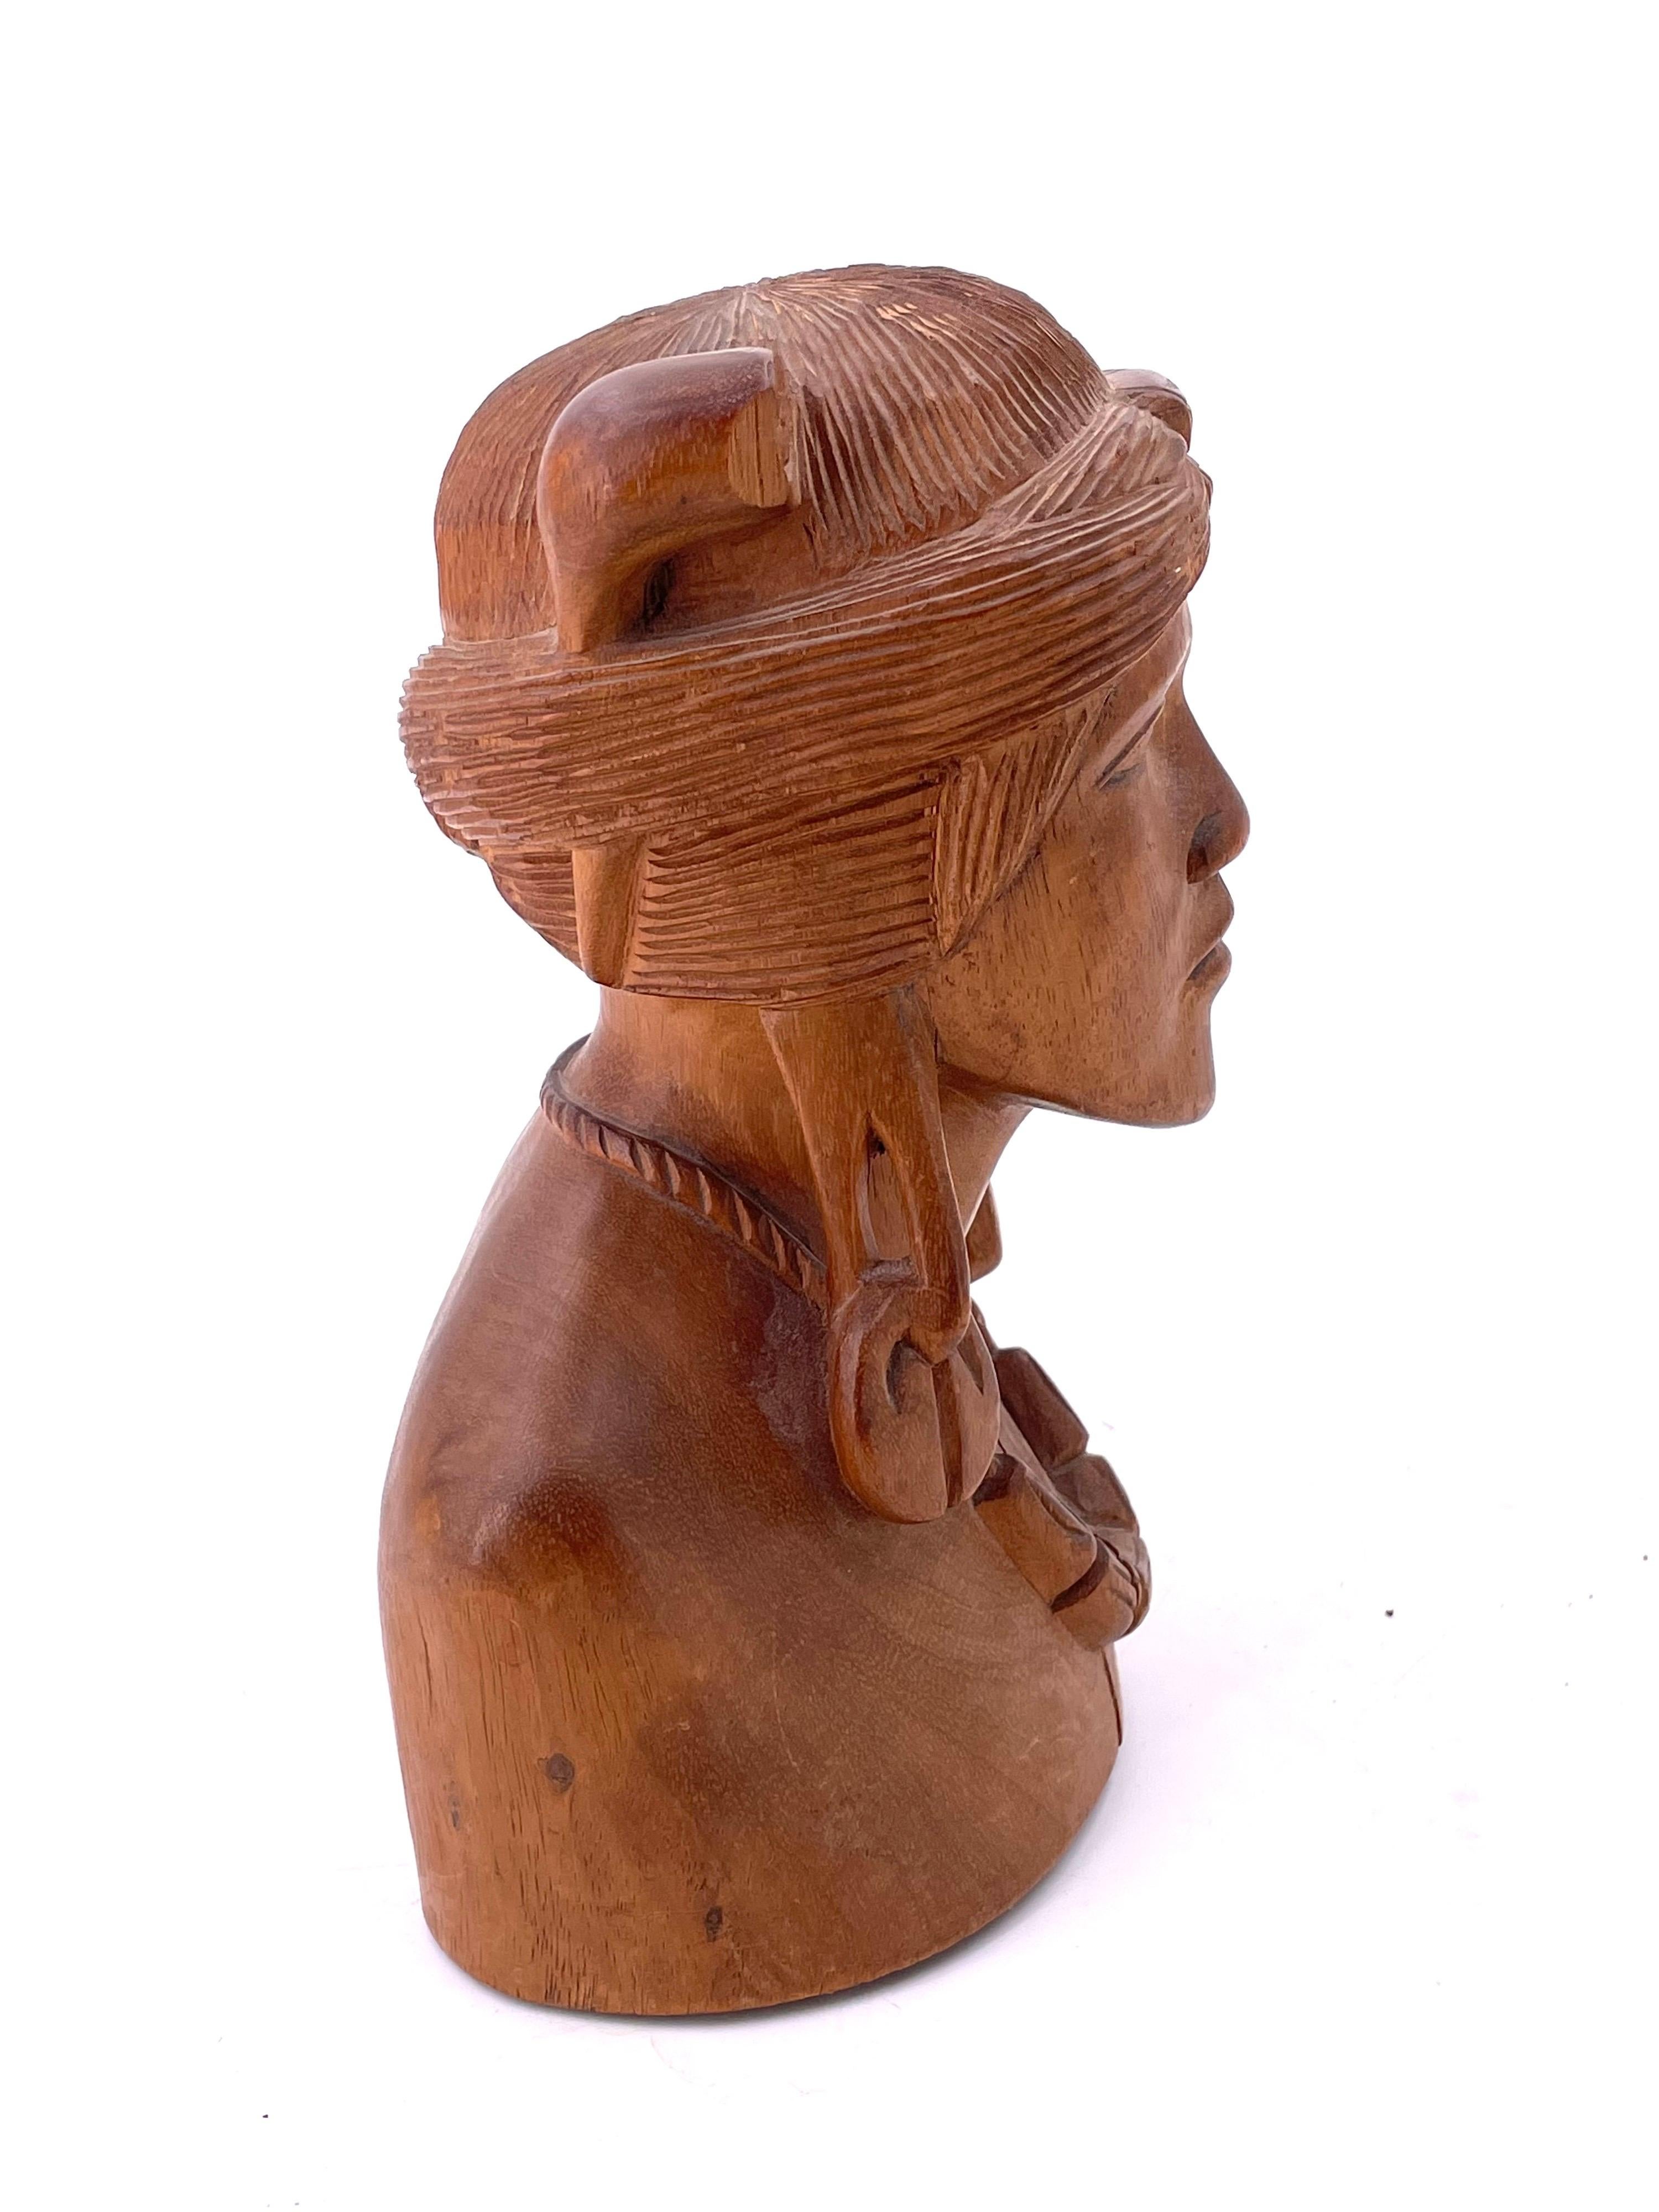 Well done hand-carved American Indian sculpture bust unsigned circa 1960's. Solid mahogany.